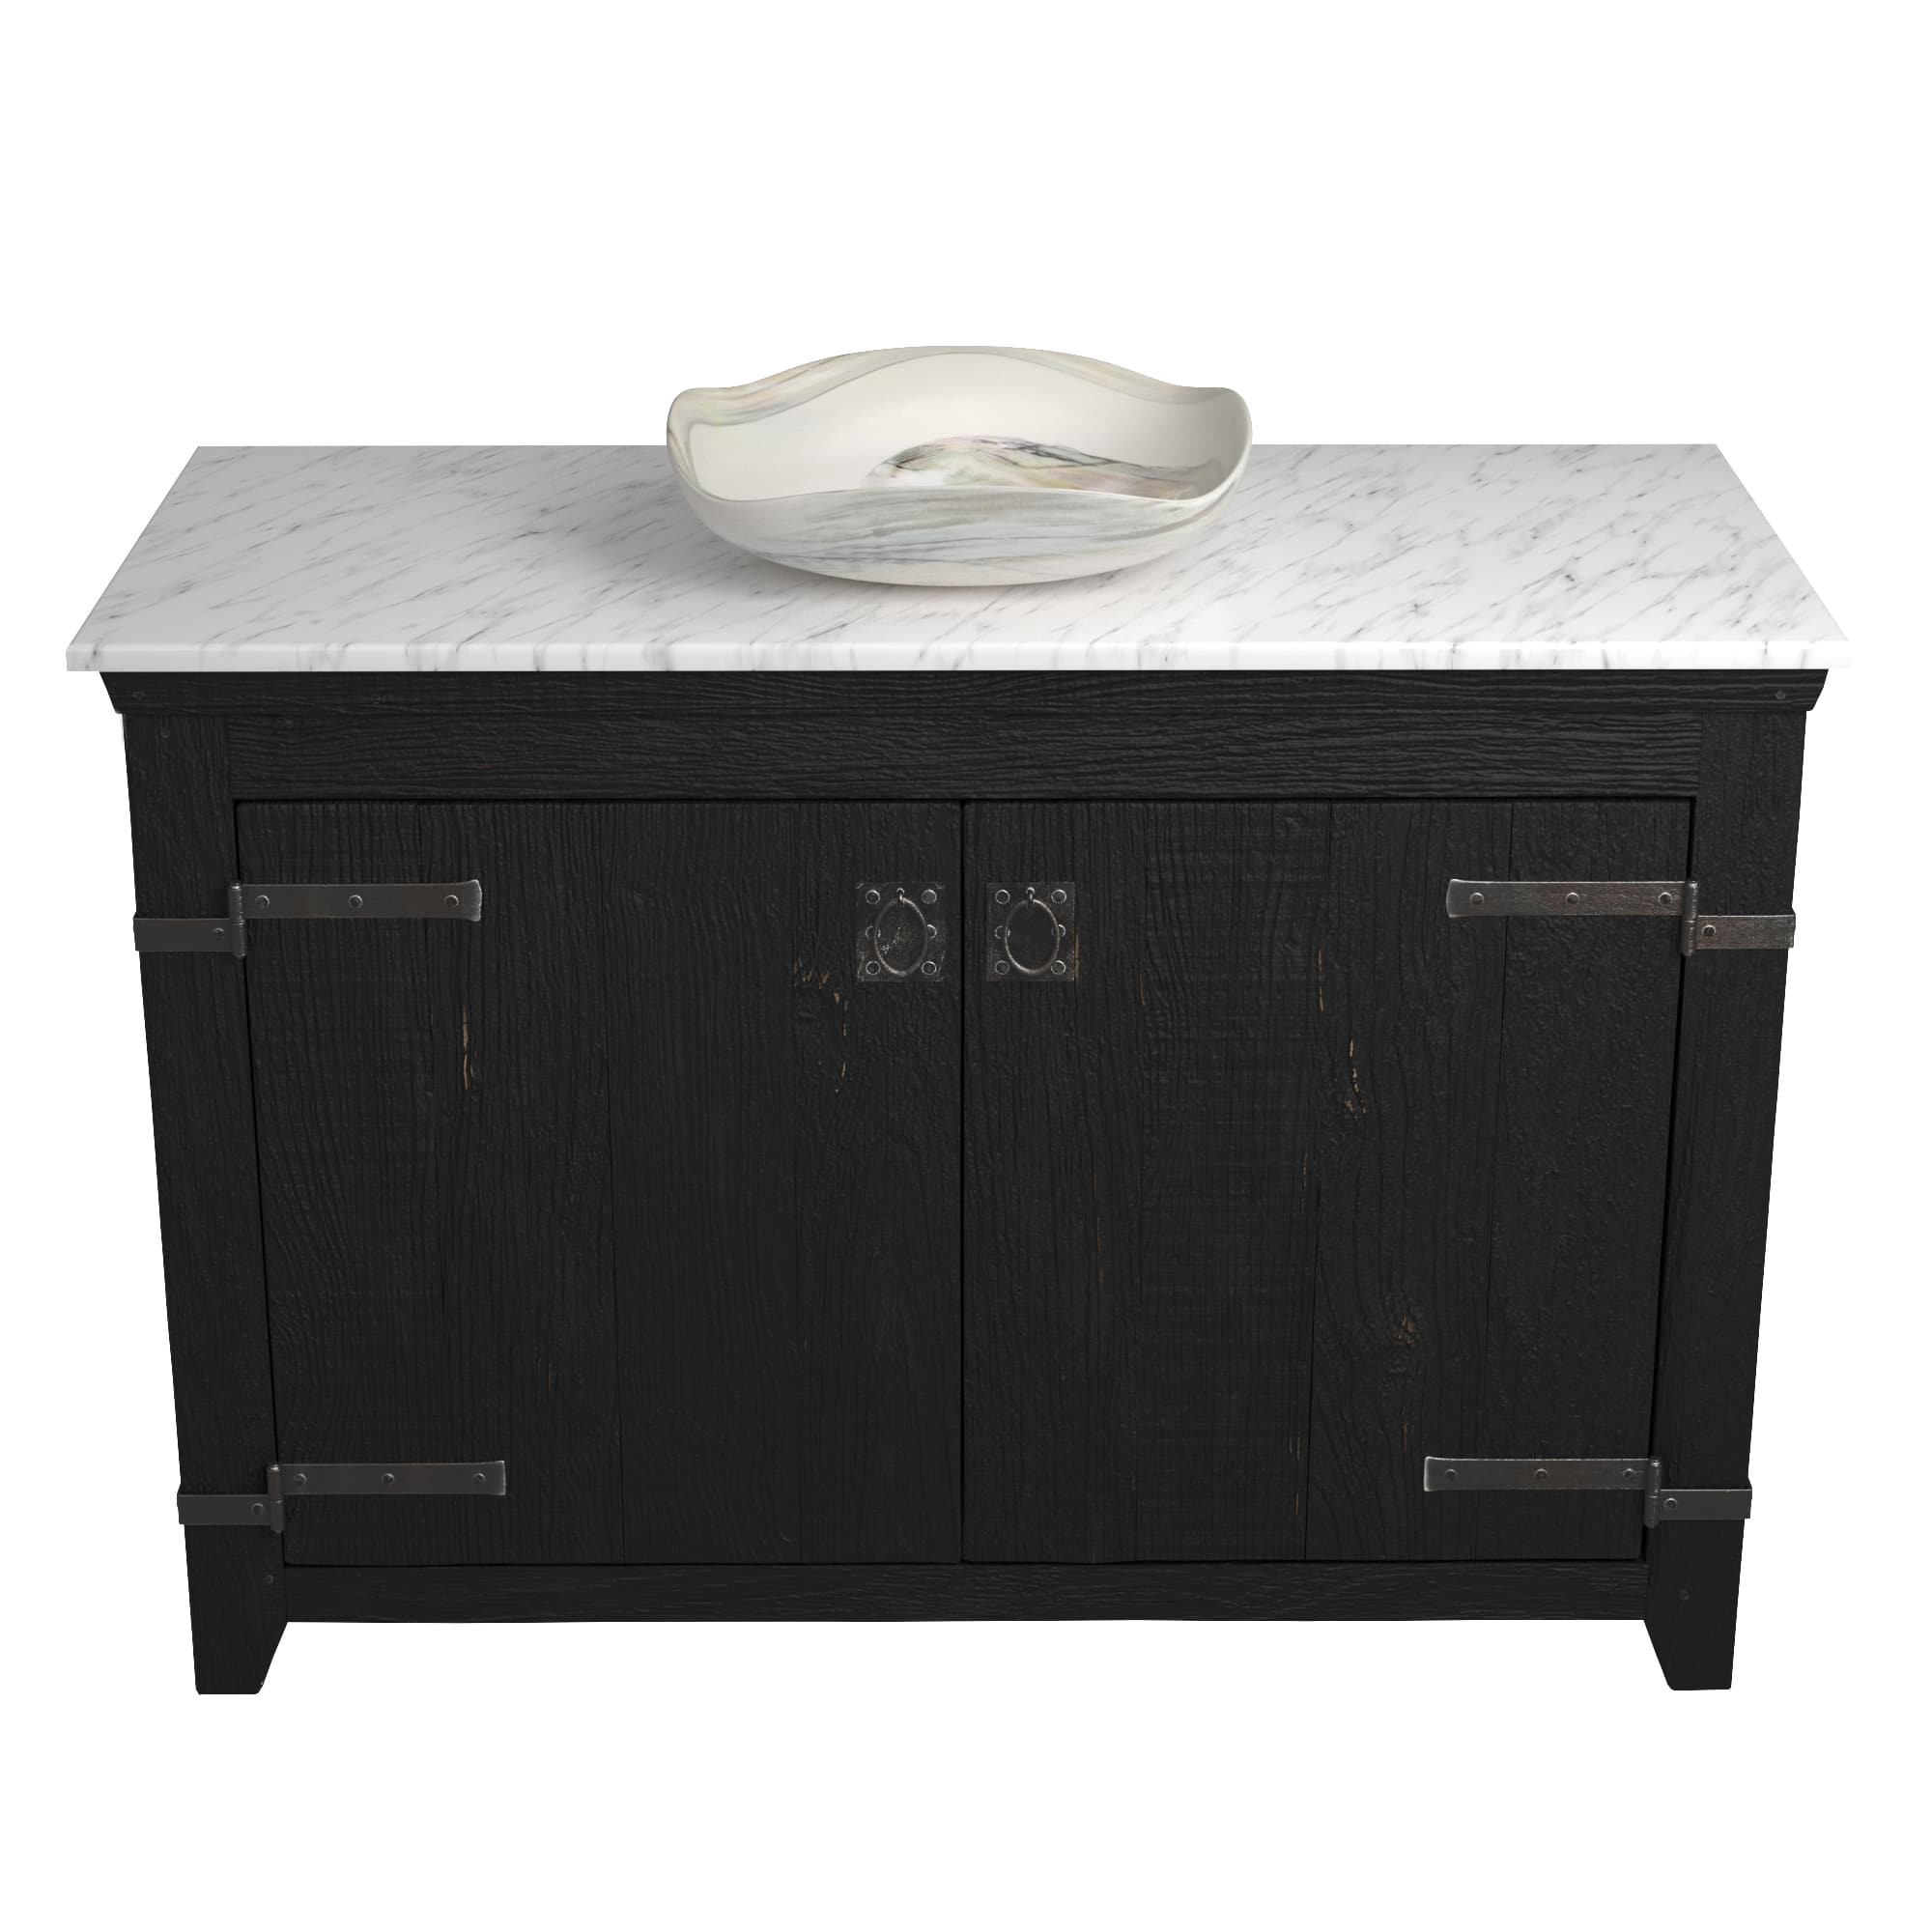 Native Trails 48" Americana Vanity in Anvil with Carrara Marble Top and Lido in Abalone, Single Faucet Hole, BND48-VB-CT-MG-005